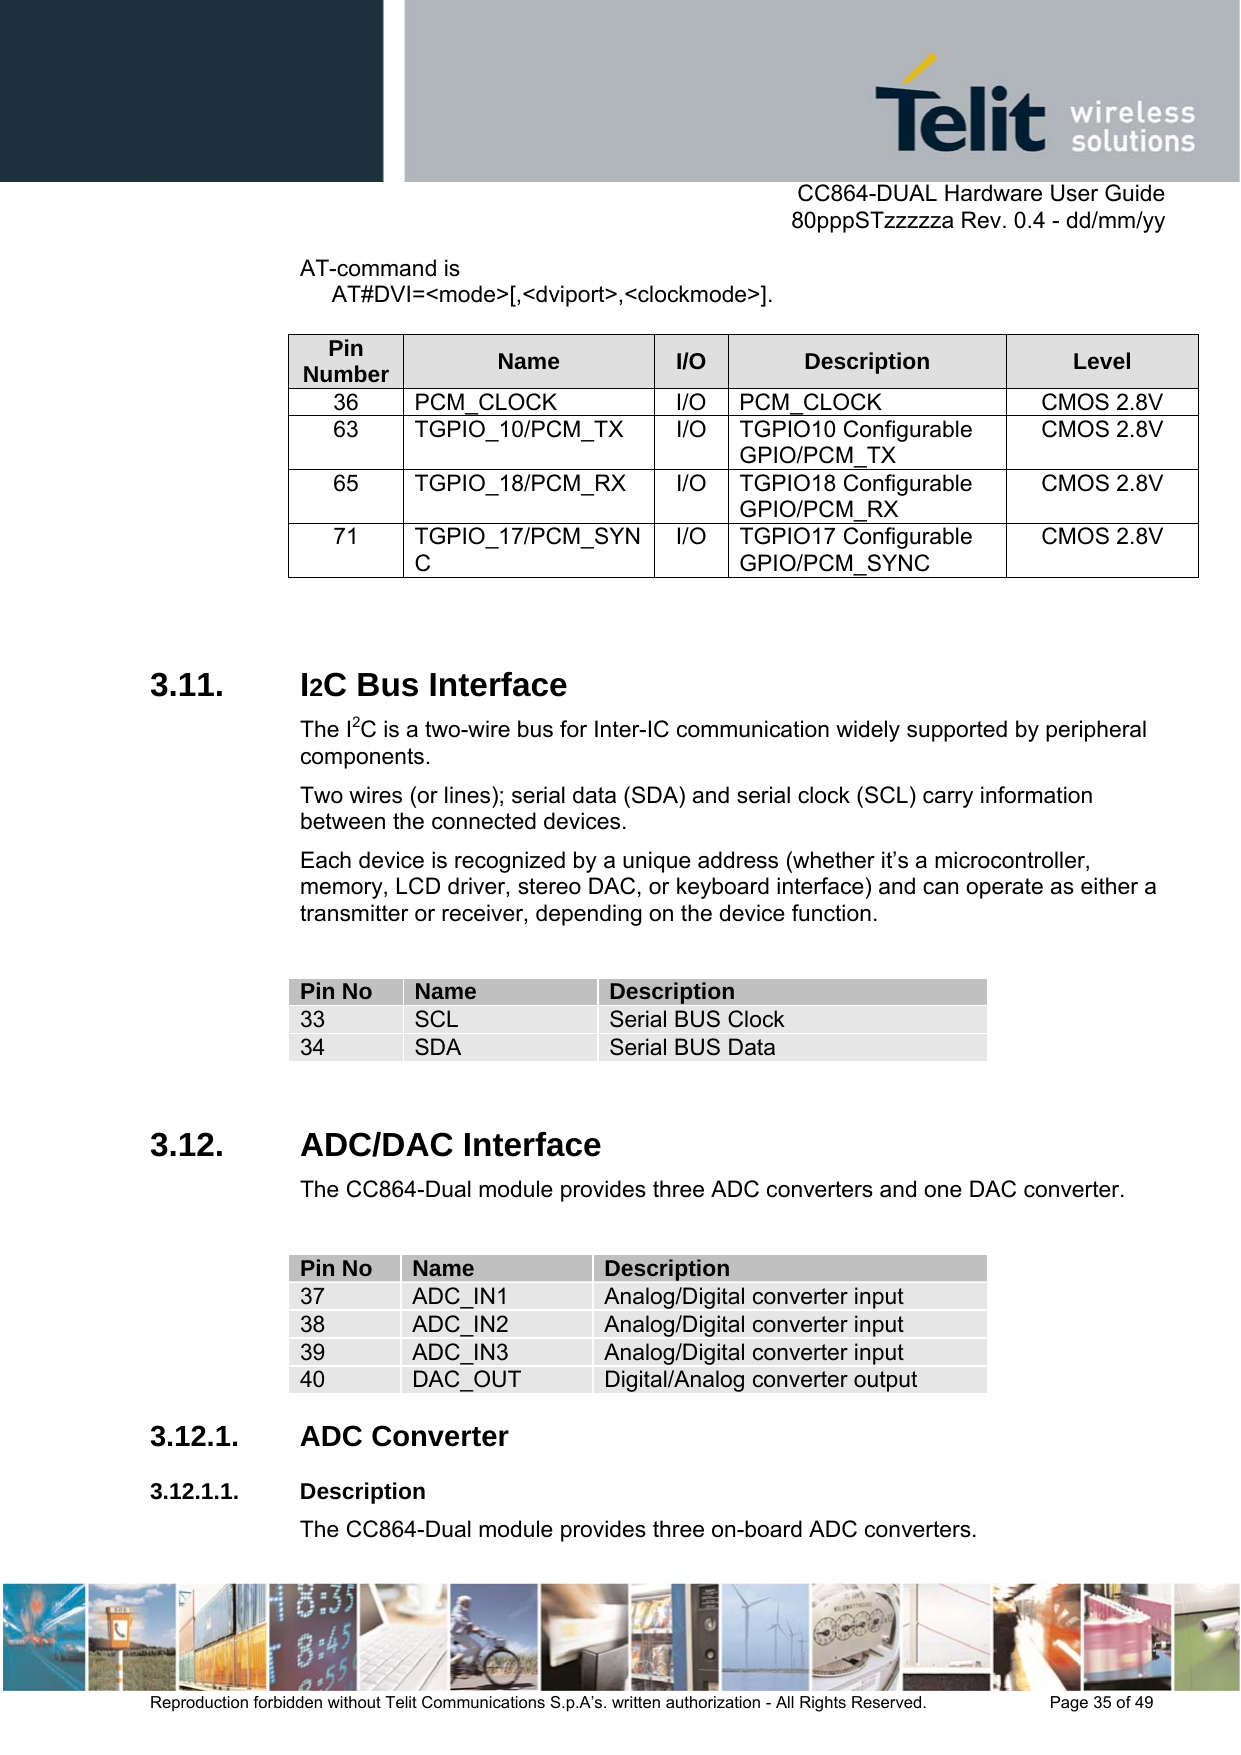      CC864-DUAL Hardware User Guide   80pppSTzzzzza Rev. 0.4 - dd/mm/yy   Reproduction forbidden without Telit Communications S.p.A’s. written authorization - All Rights Reserved.    Page 35 of 49  AT-command is       AT#DVI=&lt;mode&gt;[,&lt;dviport&gt;,&lt;clockmode&gt;].  Pin Number  Name  I/O  Description  Level 36 PCM_CLOCK  I/O PCM_CLOCK  CMOS 2.8V 63 TGPIO_10/PCM_TX I/O TGPIO10 Configurable GPIO/PCM_TX CMOS 2.8V 65 TGPIO_18/PCM_RX I/O TGPIO18 Configurable GPIO/PCM_RX CMOS 2.8V 71 TGPIO_17/PCM_SYNC I/O TGPIO17 Configurable GPIO/PCM_SYNC CMOS 2.8V  3.11. I2C Bus Interface The I2C is a two-wire bus for Inter-IC communication widely supported by peripheral components.  Two wires (or lines); serial data (SDA) and serial clock (SCL) carry information between the connected devices.  Each device is recognized by a unique address (whether it’s a microcontroller, memory, LCD driver, stereo DAC, or keyboard interface) and can operate as either a transmitter or receiver, depending on the device function.  Pin No  Name  Description 33  SCL  Serial BUS Clock 34  SDA  Serial BUS Data  3.12. ADC/DAC Interface The CC864-Dual module provides three ADC converters and one DAC converter.  Pin No  Name  Description 37  ADC_IN1  Analog/Digital converter input 38  ADC_IN2  Analog/Digital converter input 39  ADC_IN3  Analog/Digital converter input 40  DAC_OUT  Digital/Analog converter output 3.12.1. ADC Converter 3.12.1.1. Description The CC864-Dual module provides three on-board ADC converters. 